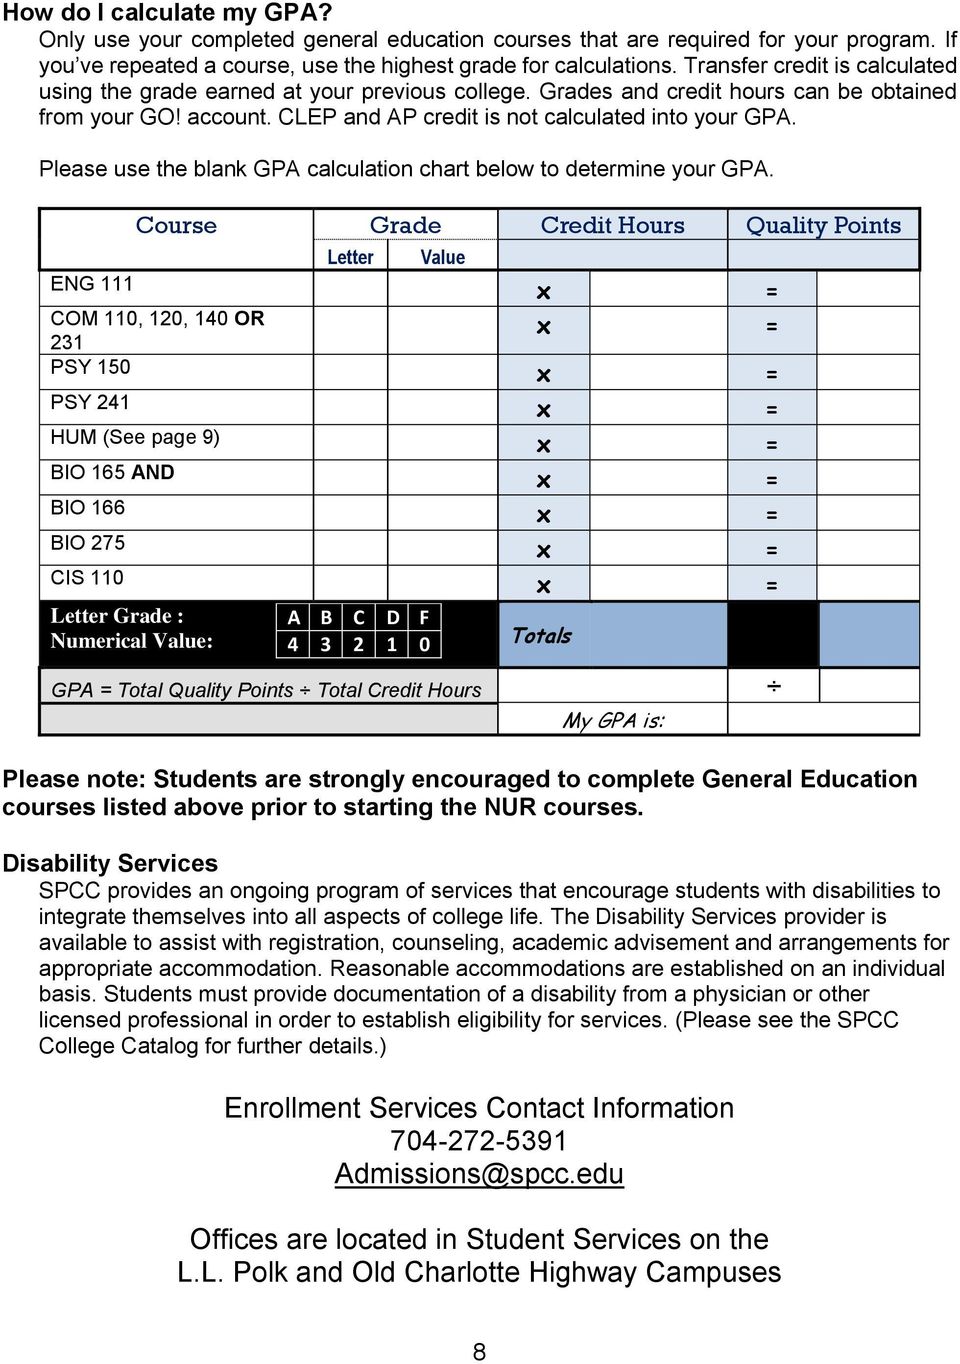 Please use the blank GPA calculation chart below to determine your GPA.